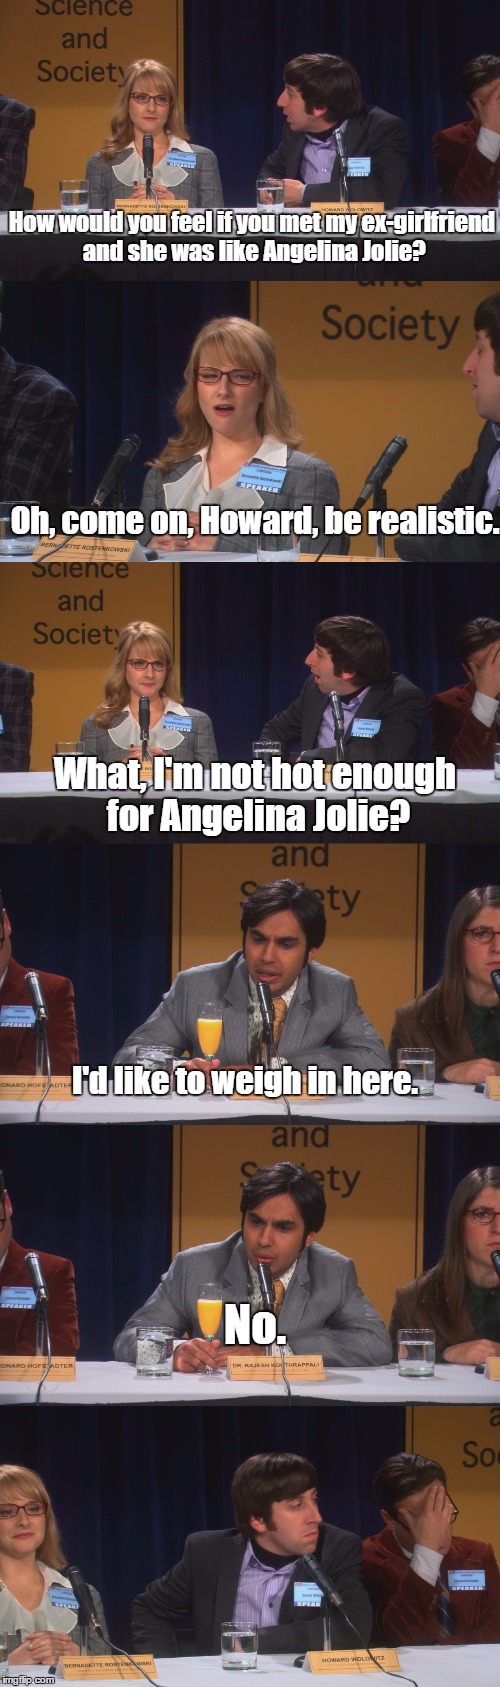 TBBT S04E13 | How would you feel if you met my ex-girlfriend and she was like Angelina Jolie? Oh, come on, Howard, be realistic. What, I'm not hot enough for Angelina Jolie? I'd like to weigh in here. No. | image tagged in the big bang theory,friends,drunk | made w/ Imgflip meme maker